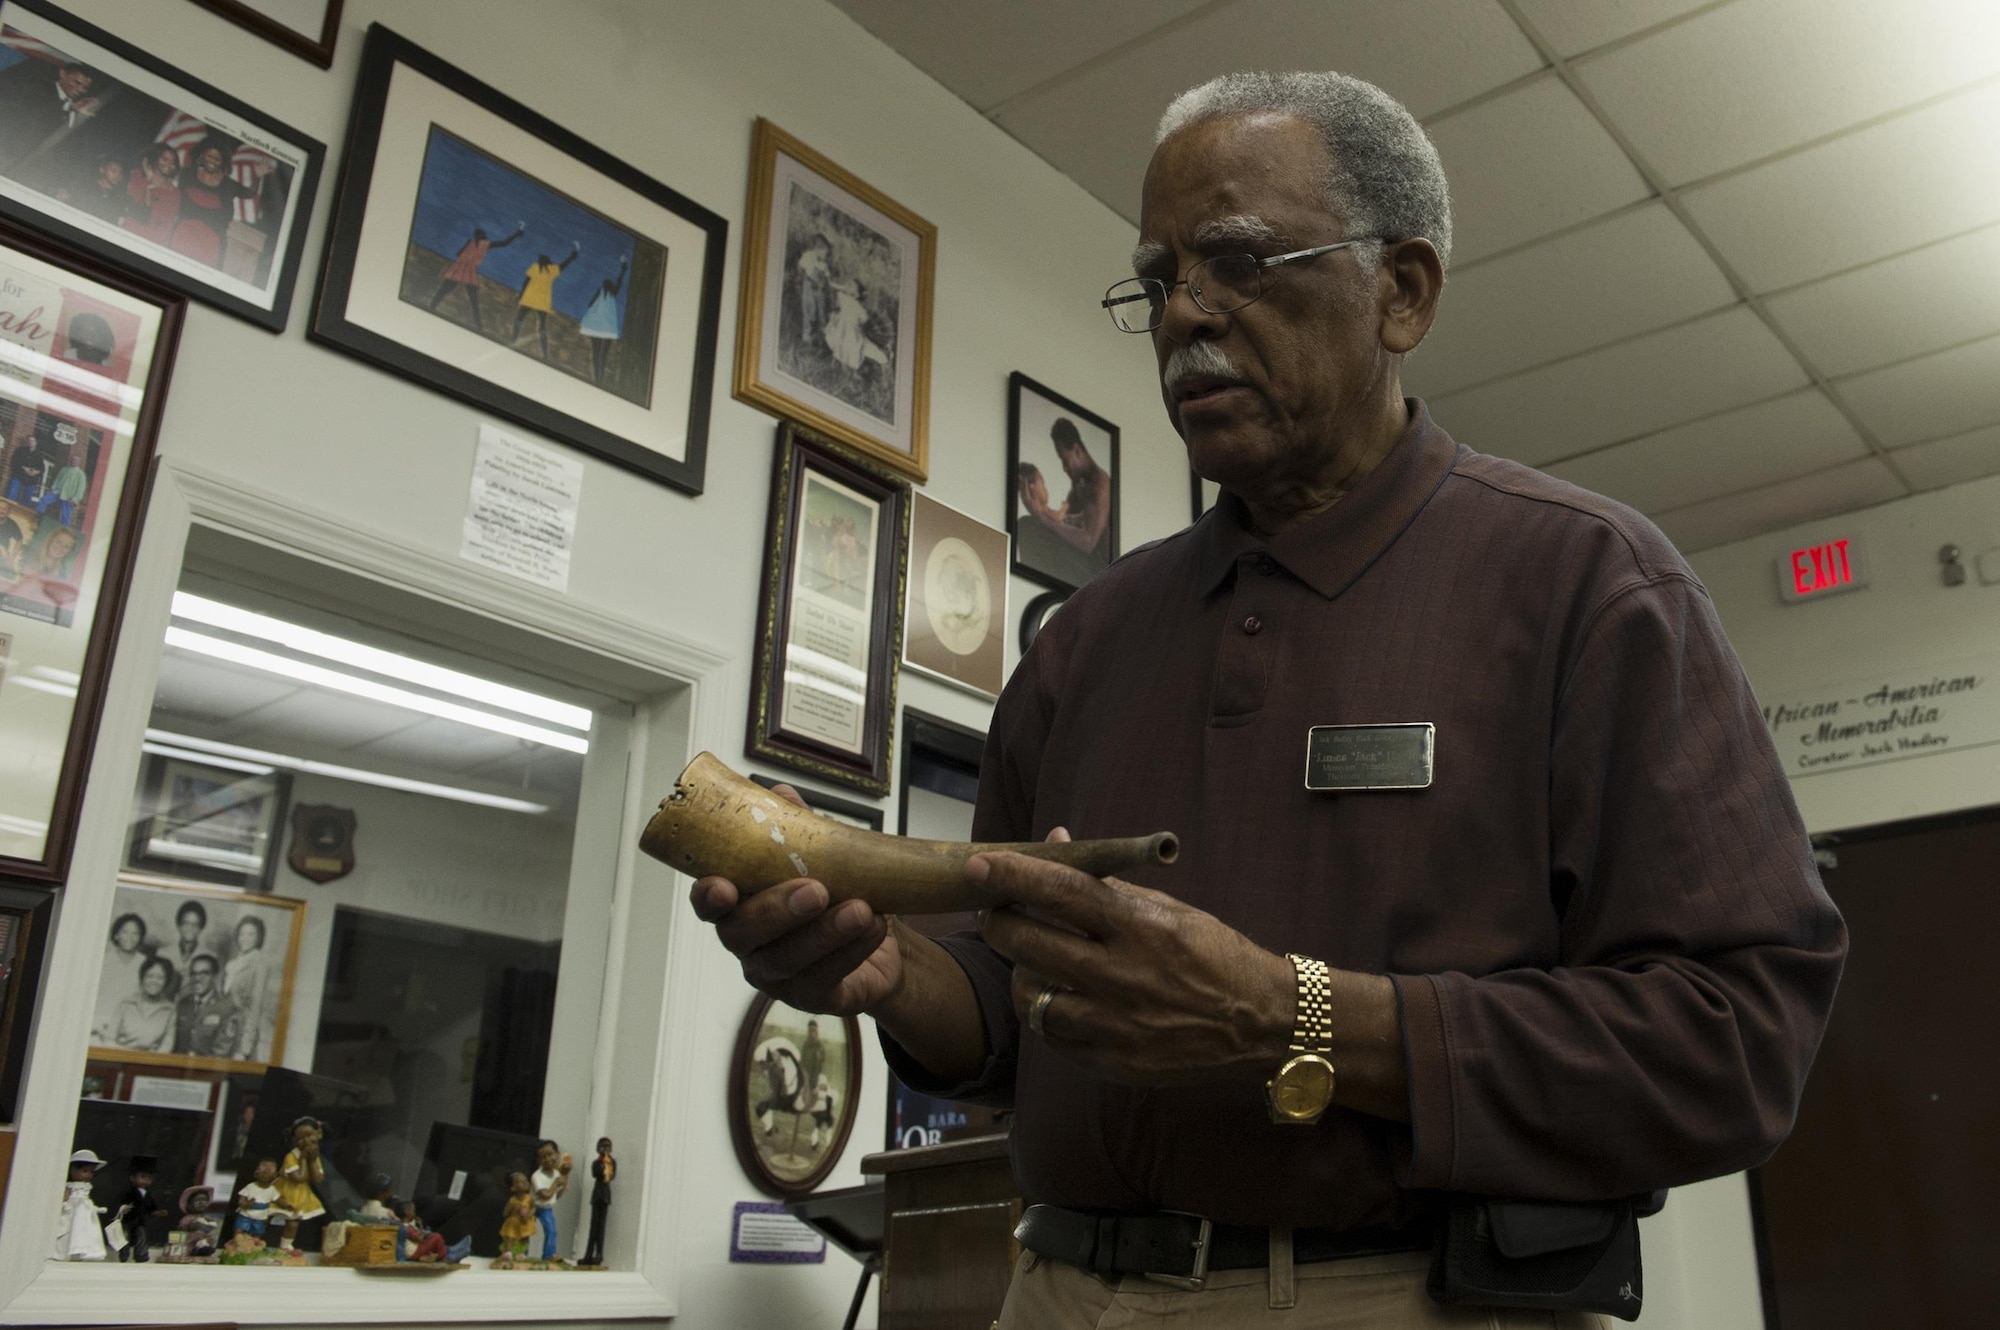 Retired Chief Master Sgt. James “Jack” Hadley, Black History Museum curator, holds a signal horn, Feb. 8, 2016, at the Jack Hadley Black History Museum in Thomasville, Ga. The horn is a Hadley family heirloom which has been passed down since approximately 1850. (U.S. Air Force photo/Airman 1st Class Kathleen D. Bryant)